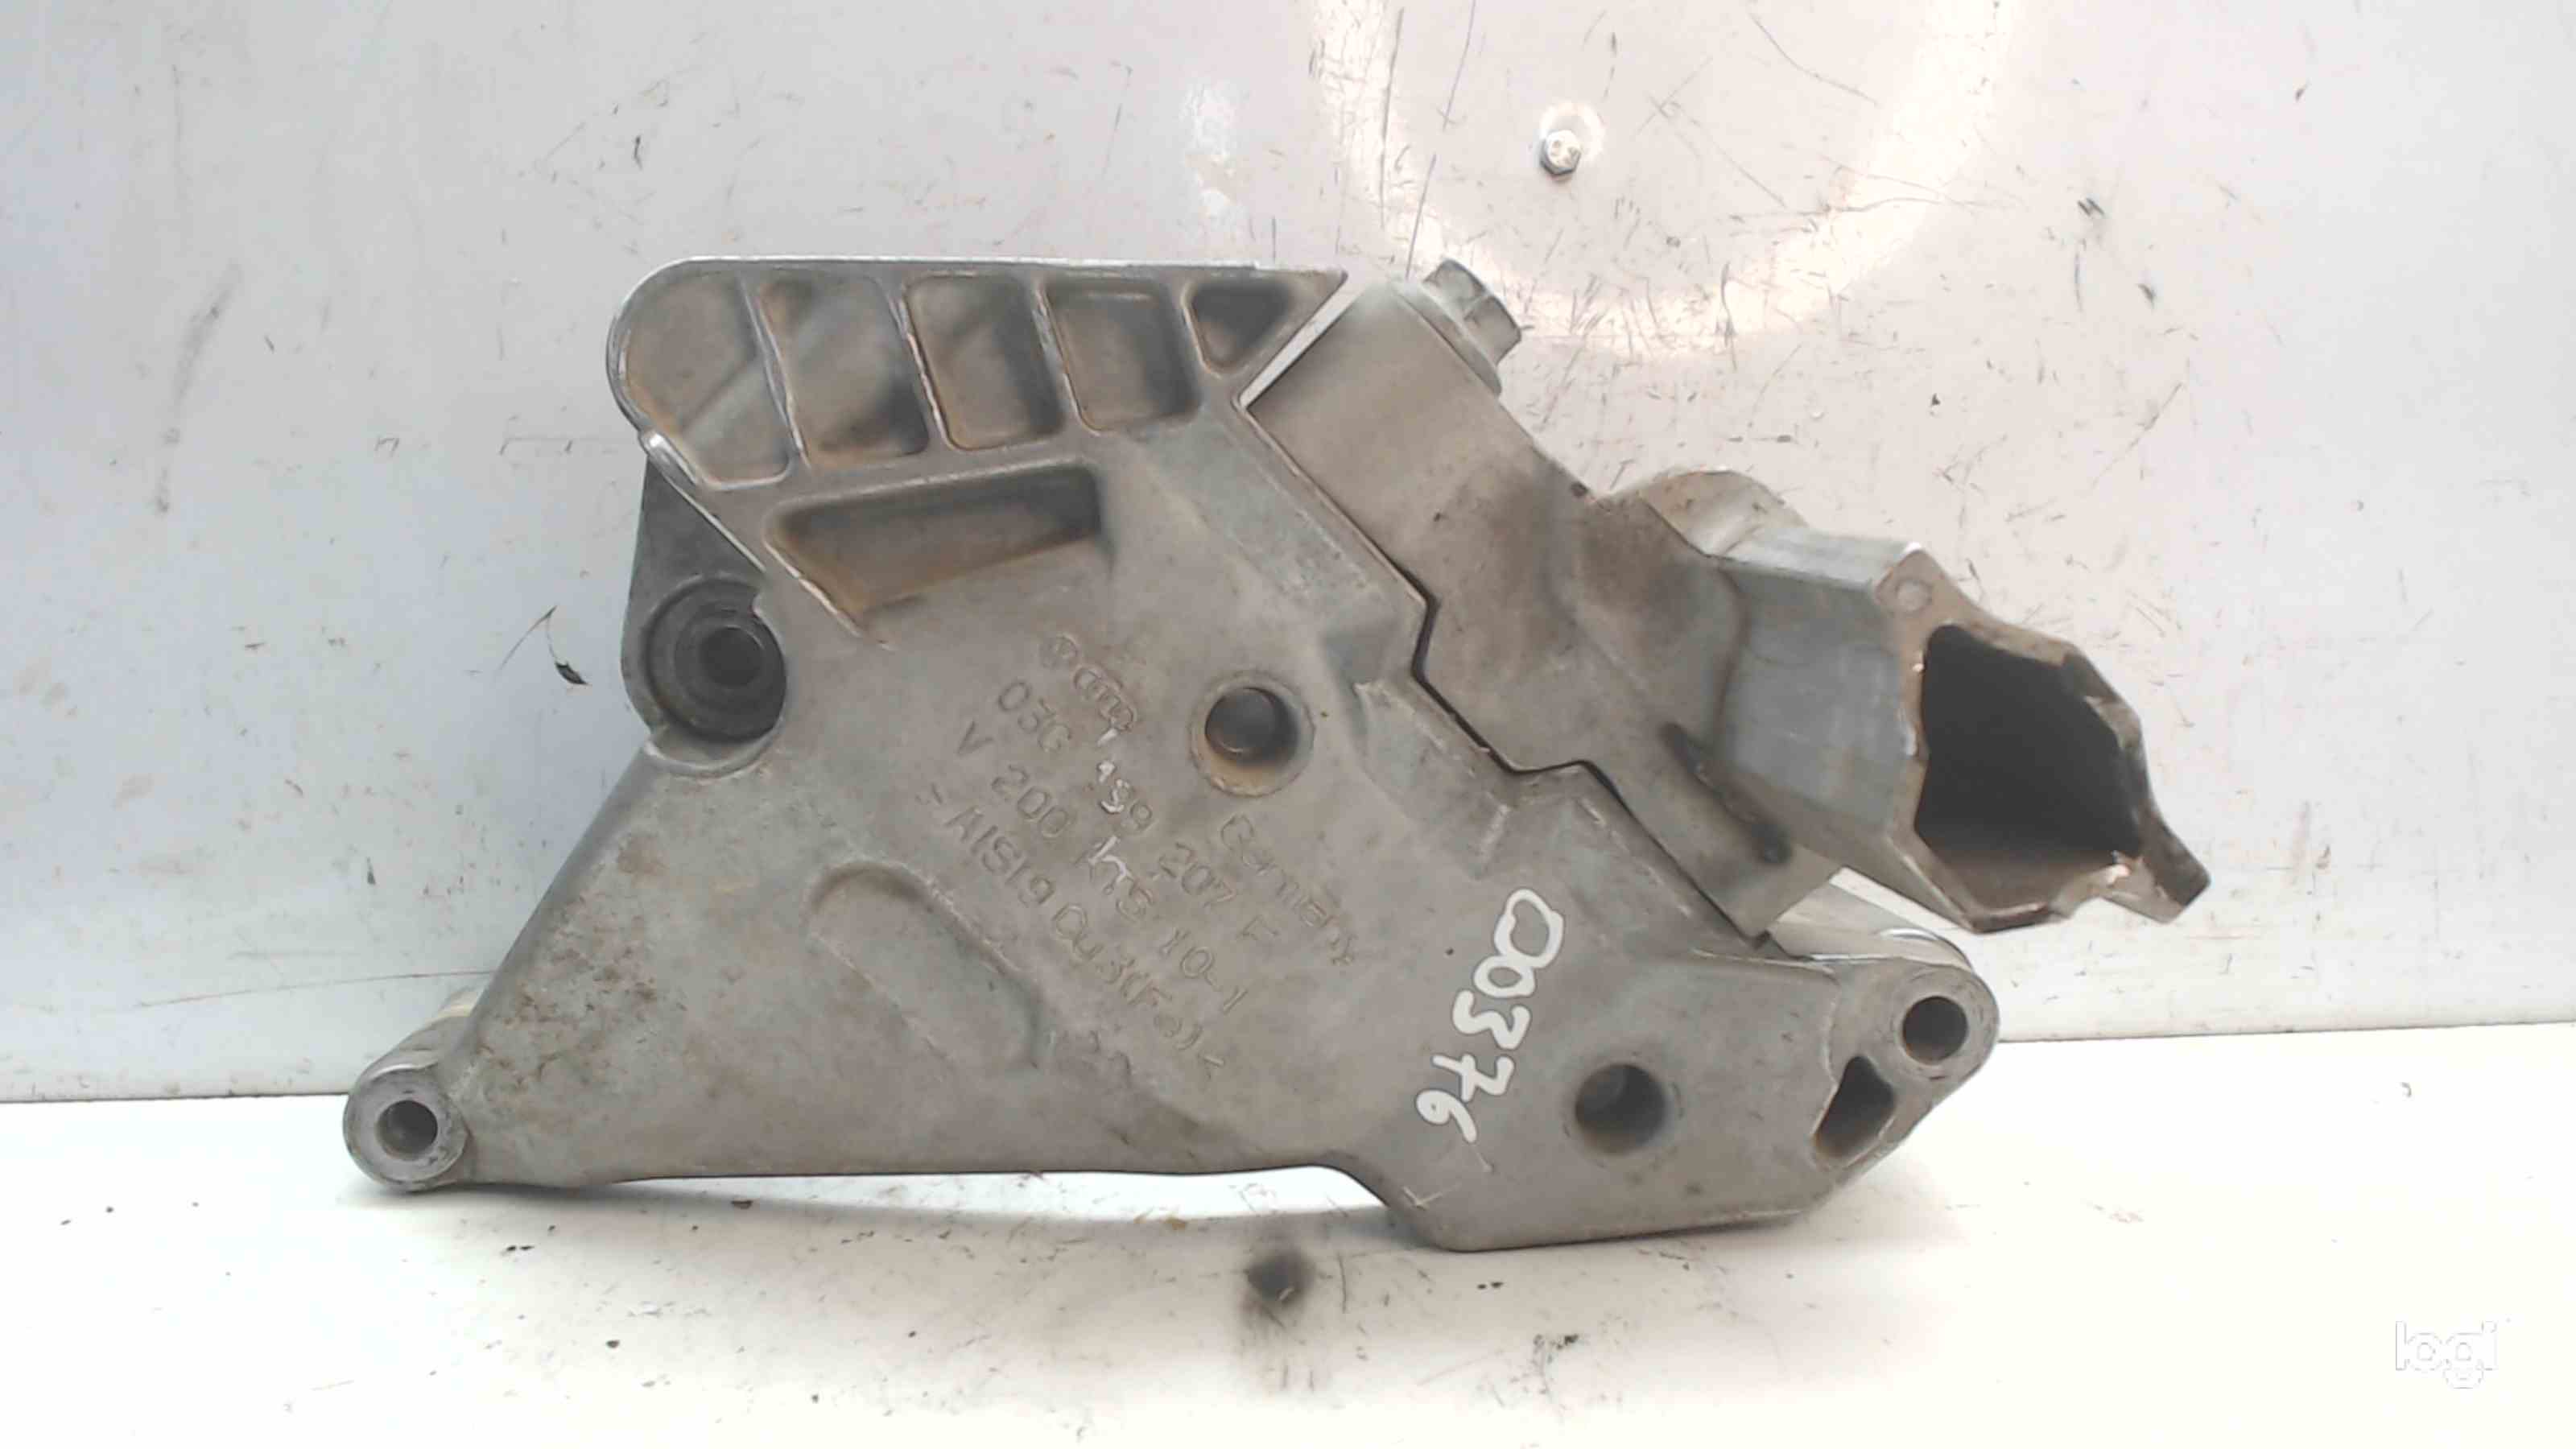 SEAT Leon 2 generation (2005-2012) Other Engine Compartment Parts 03G199207 24687014